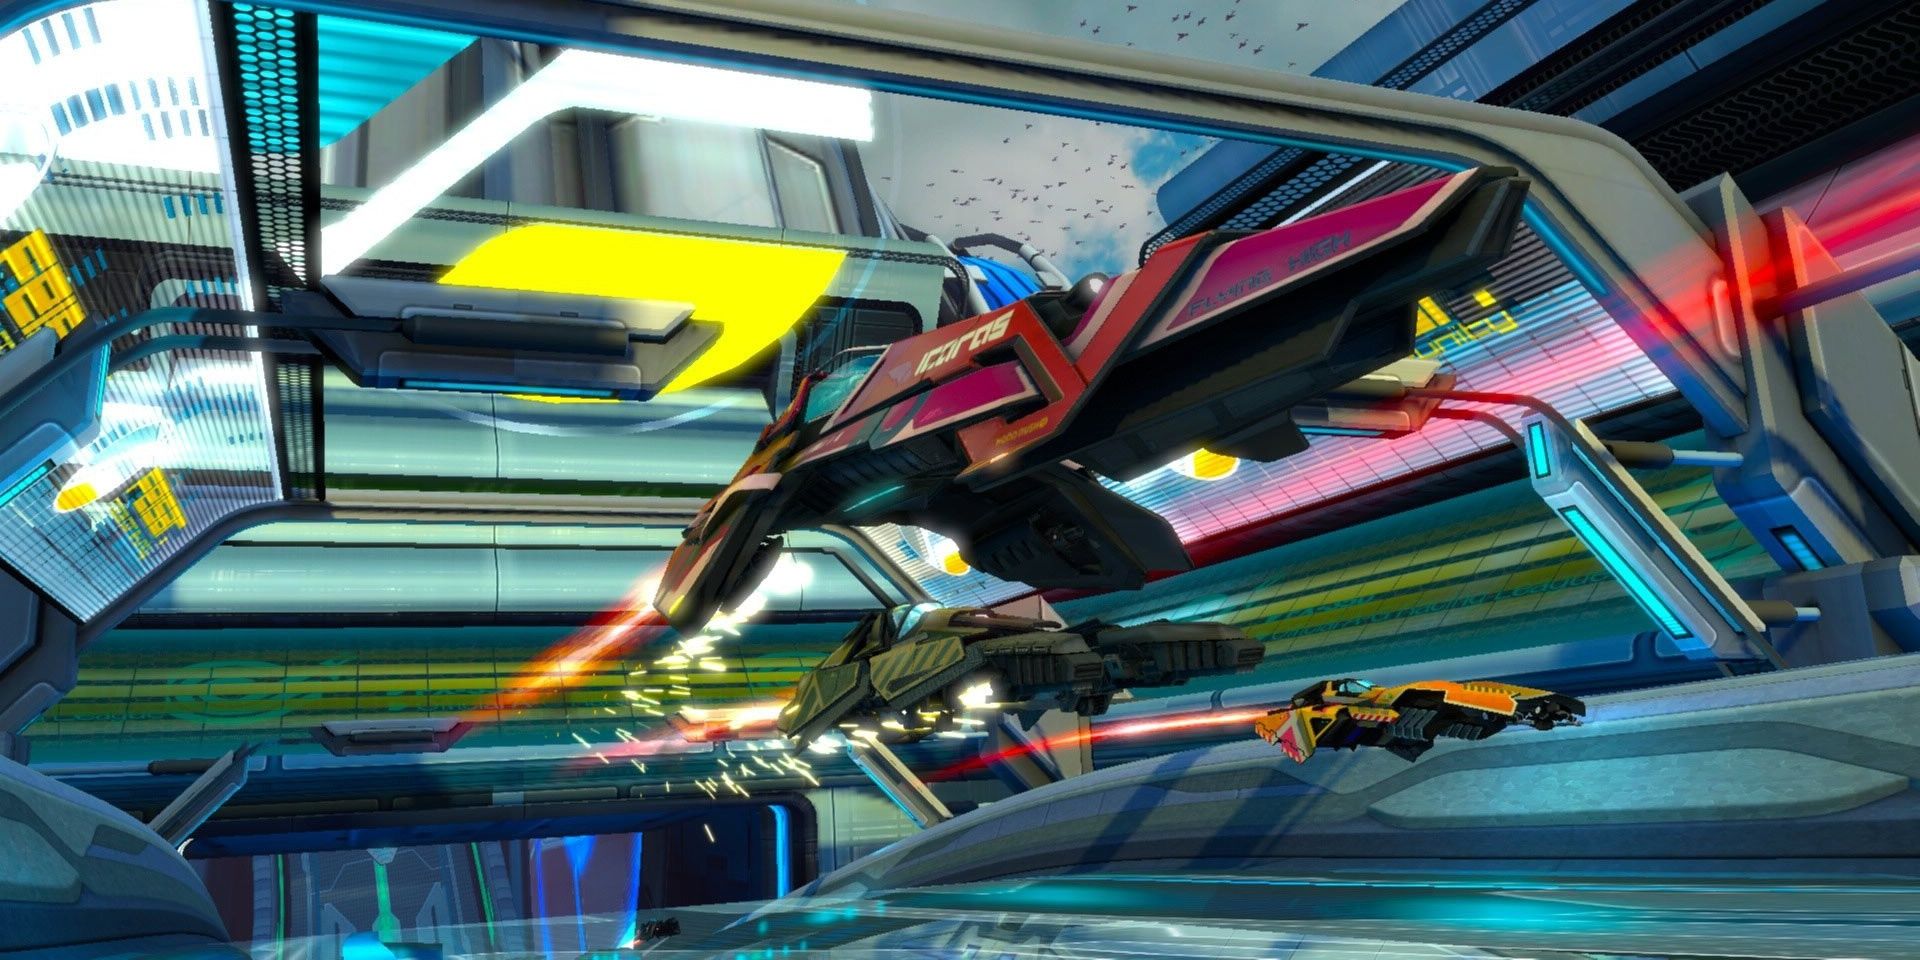 A screenshot showing gameplay in Wipeout Omega Collection